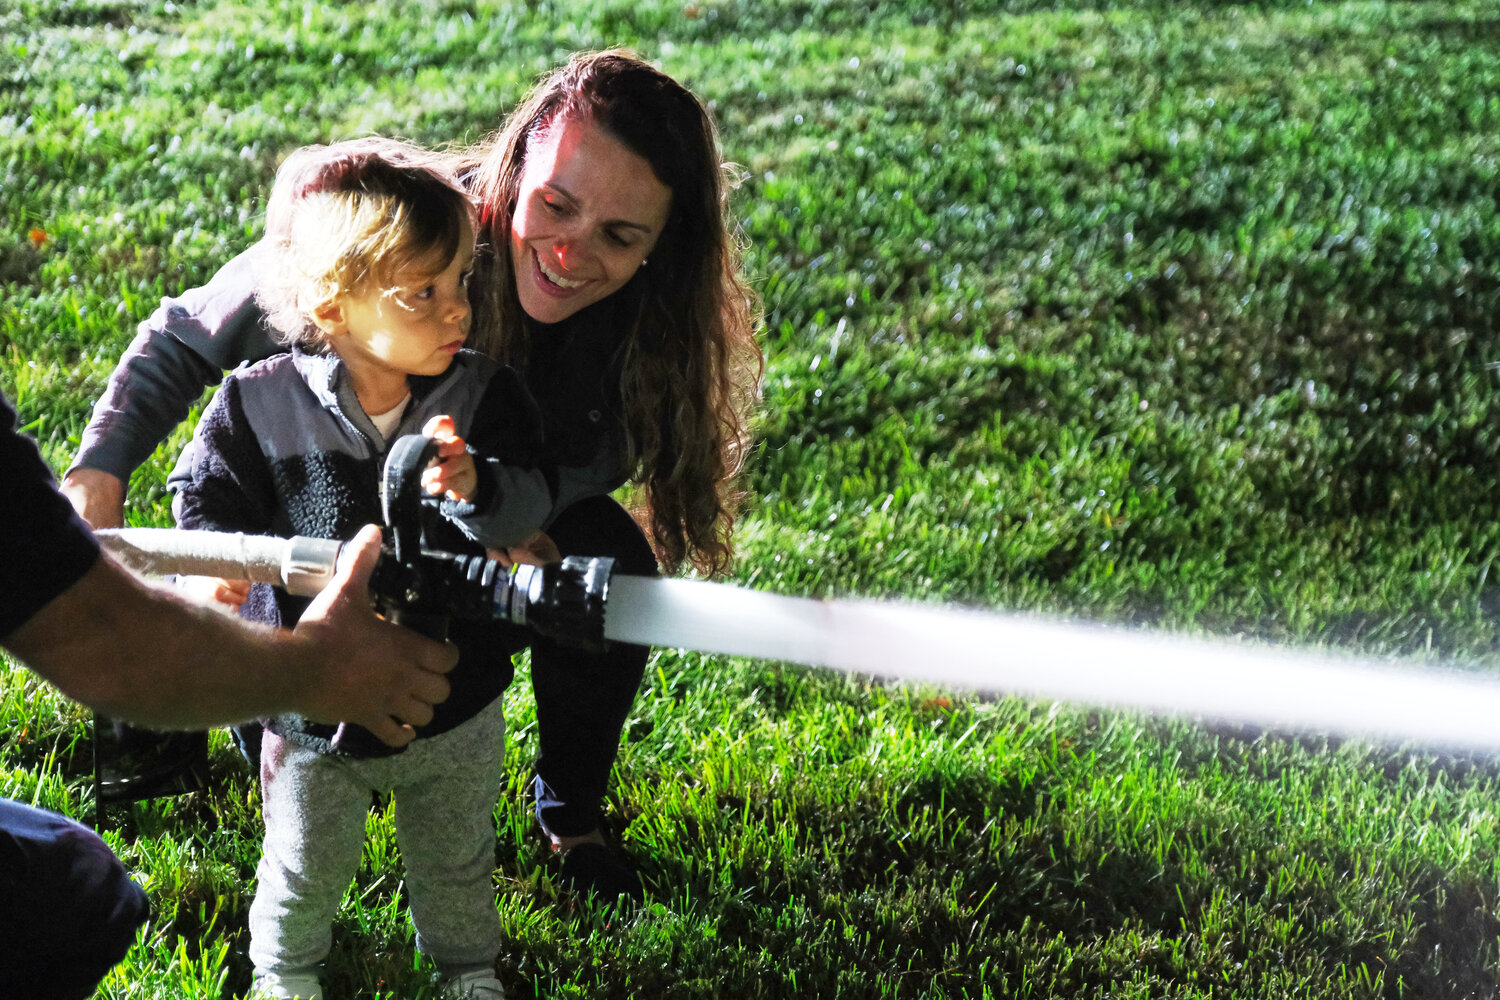 Maria Lacovara, of New Hope, helps her son Dominic work the fire hose.